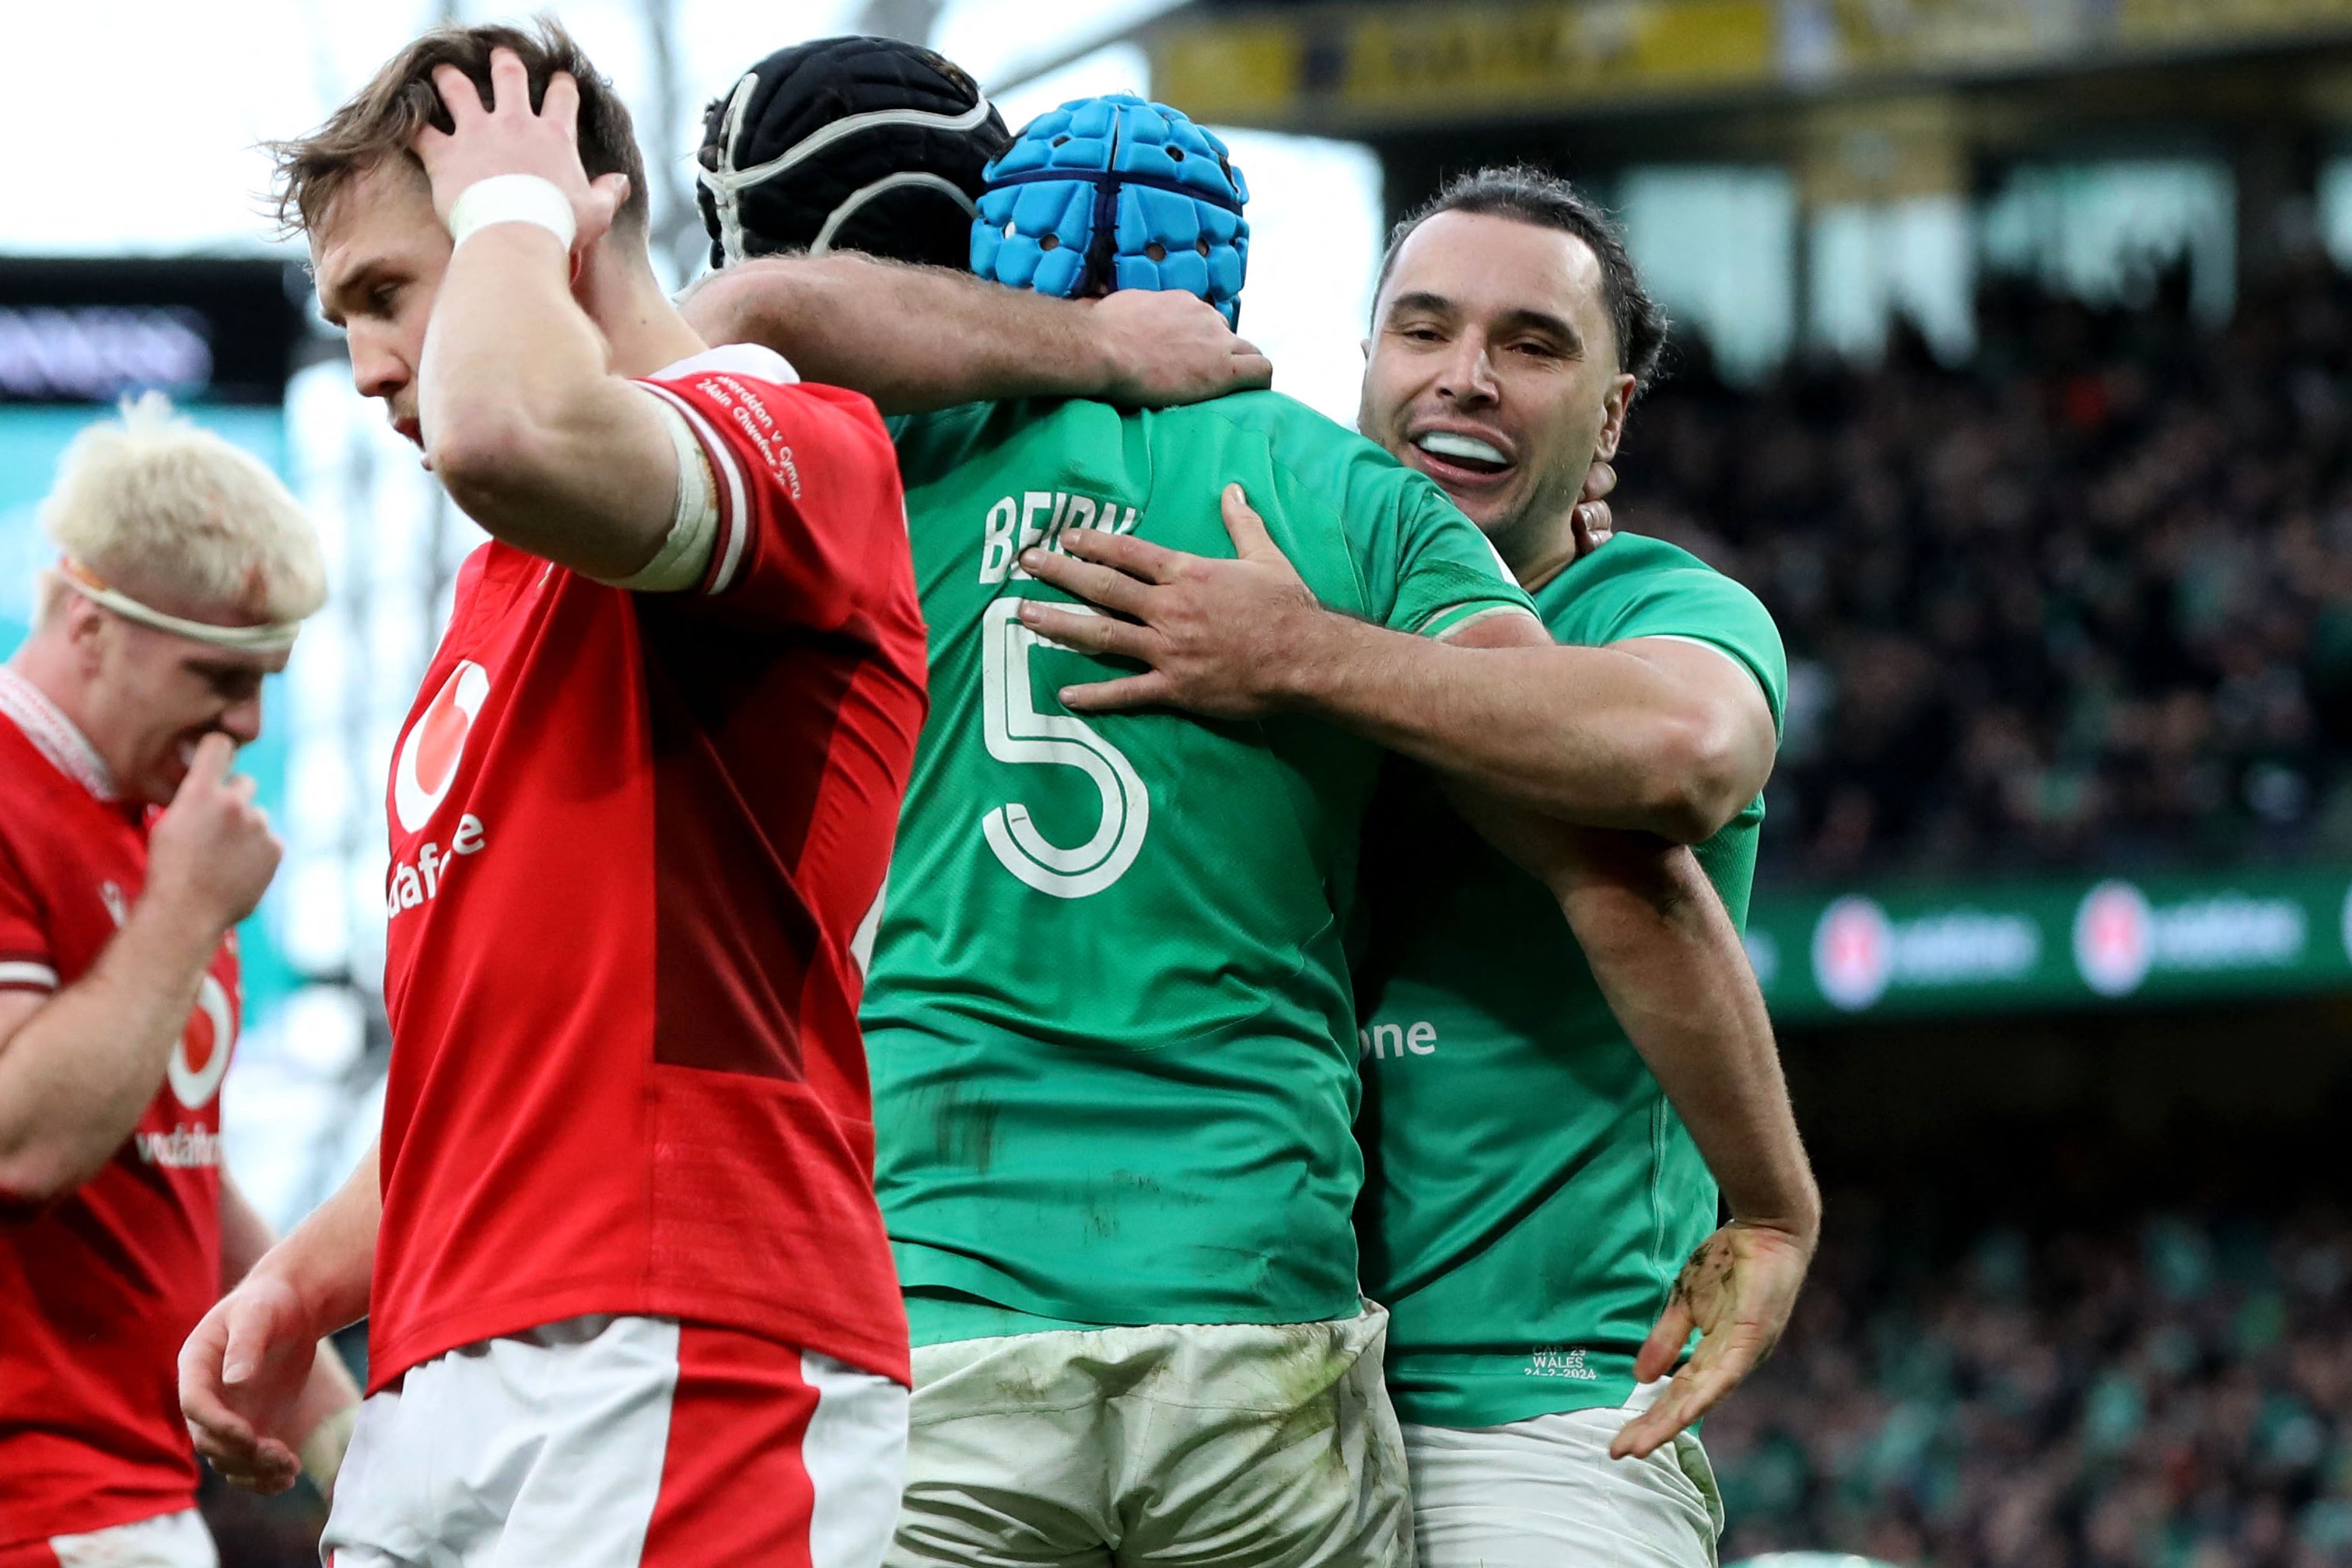 Ireland secured a hard-fought bonus-point win over Wales in Dublin